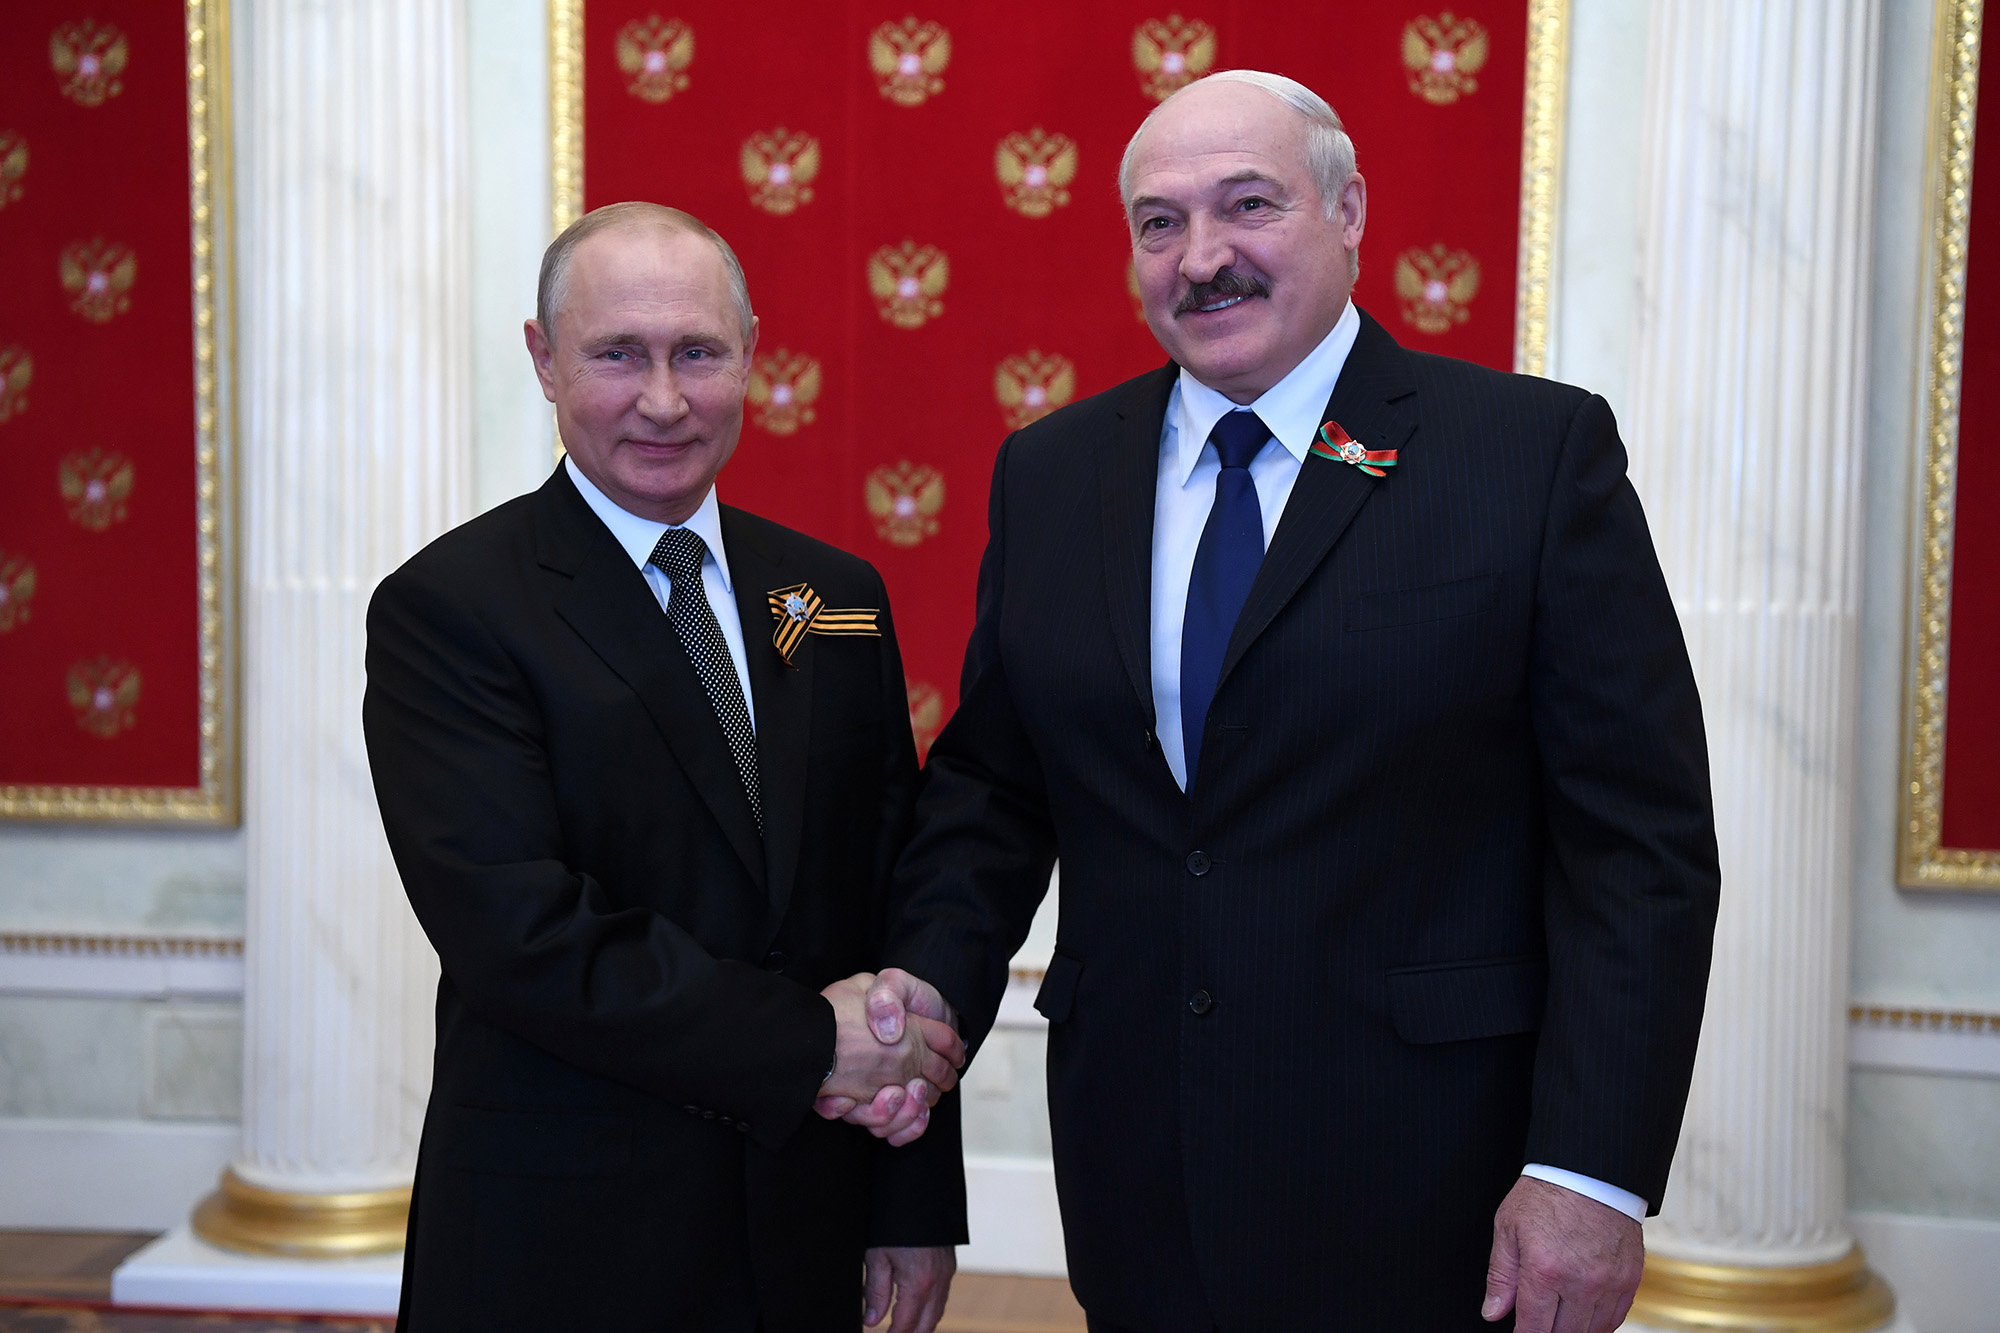 Russia's President Vladimir Putin (L) and Belarusian President Alexander Lukashenko shake hands as they pose for a photograph during a ceremony in the Kremlin, Moscow, Russia on June 24, 2020.